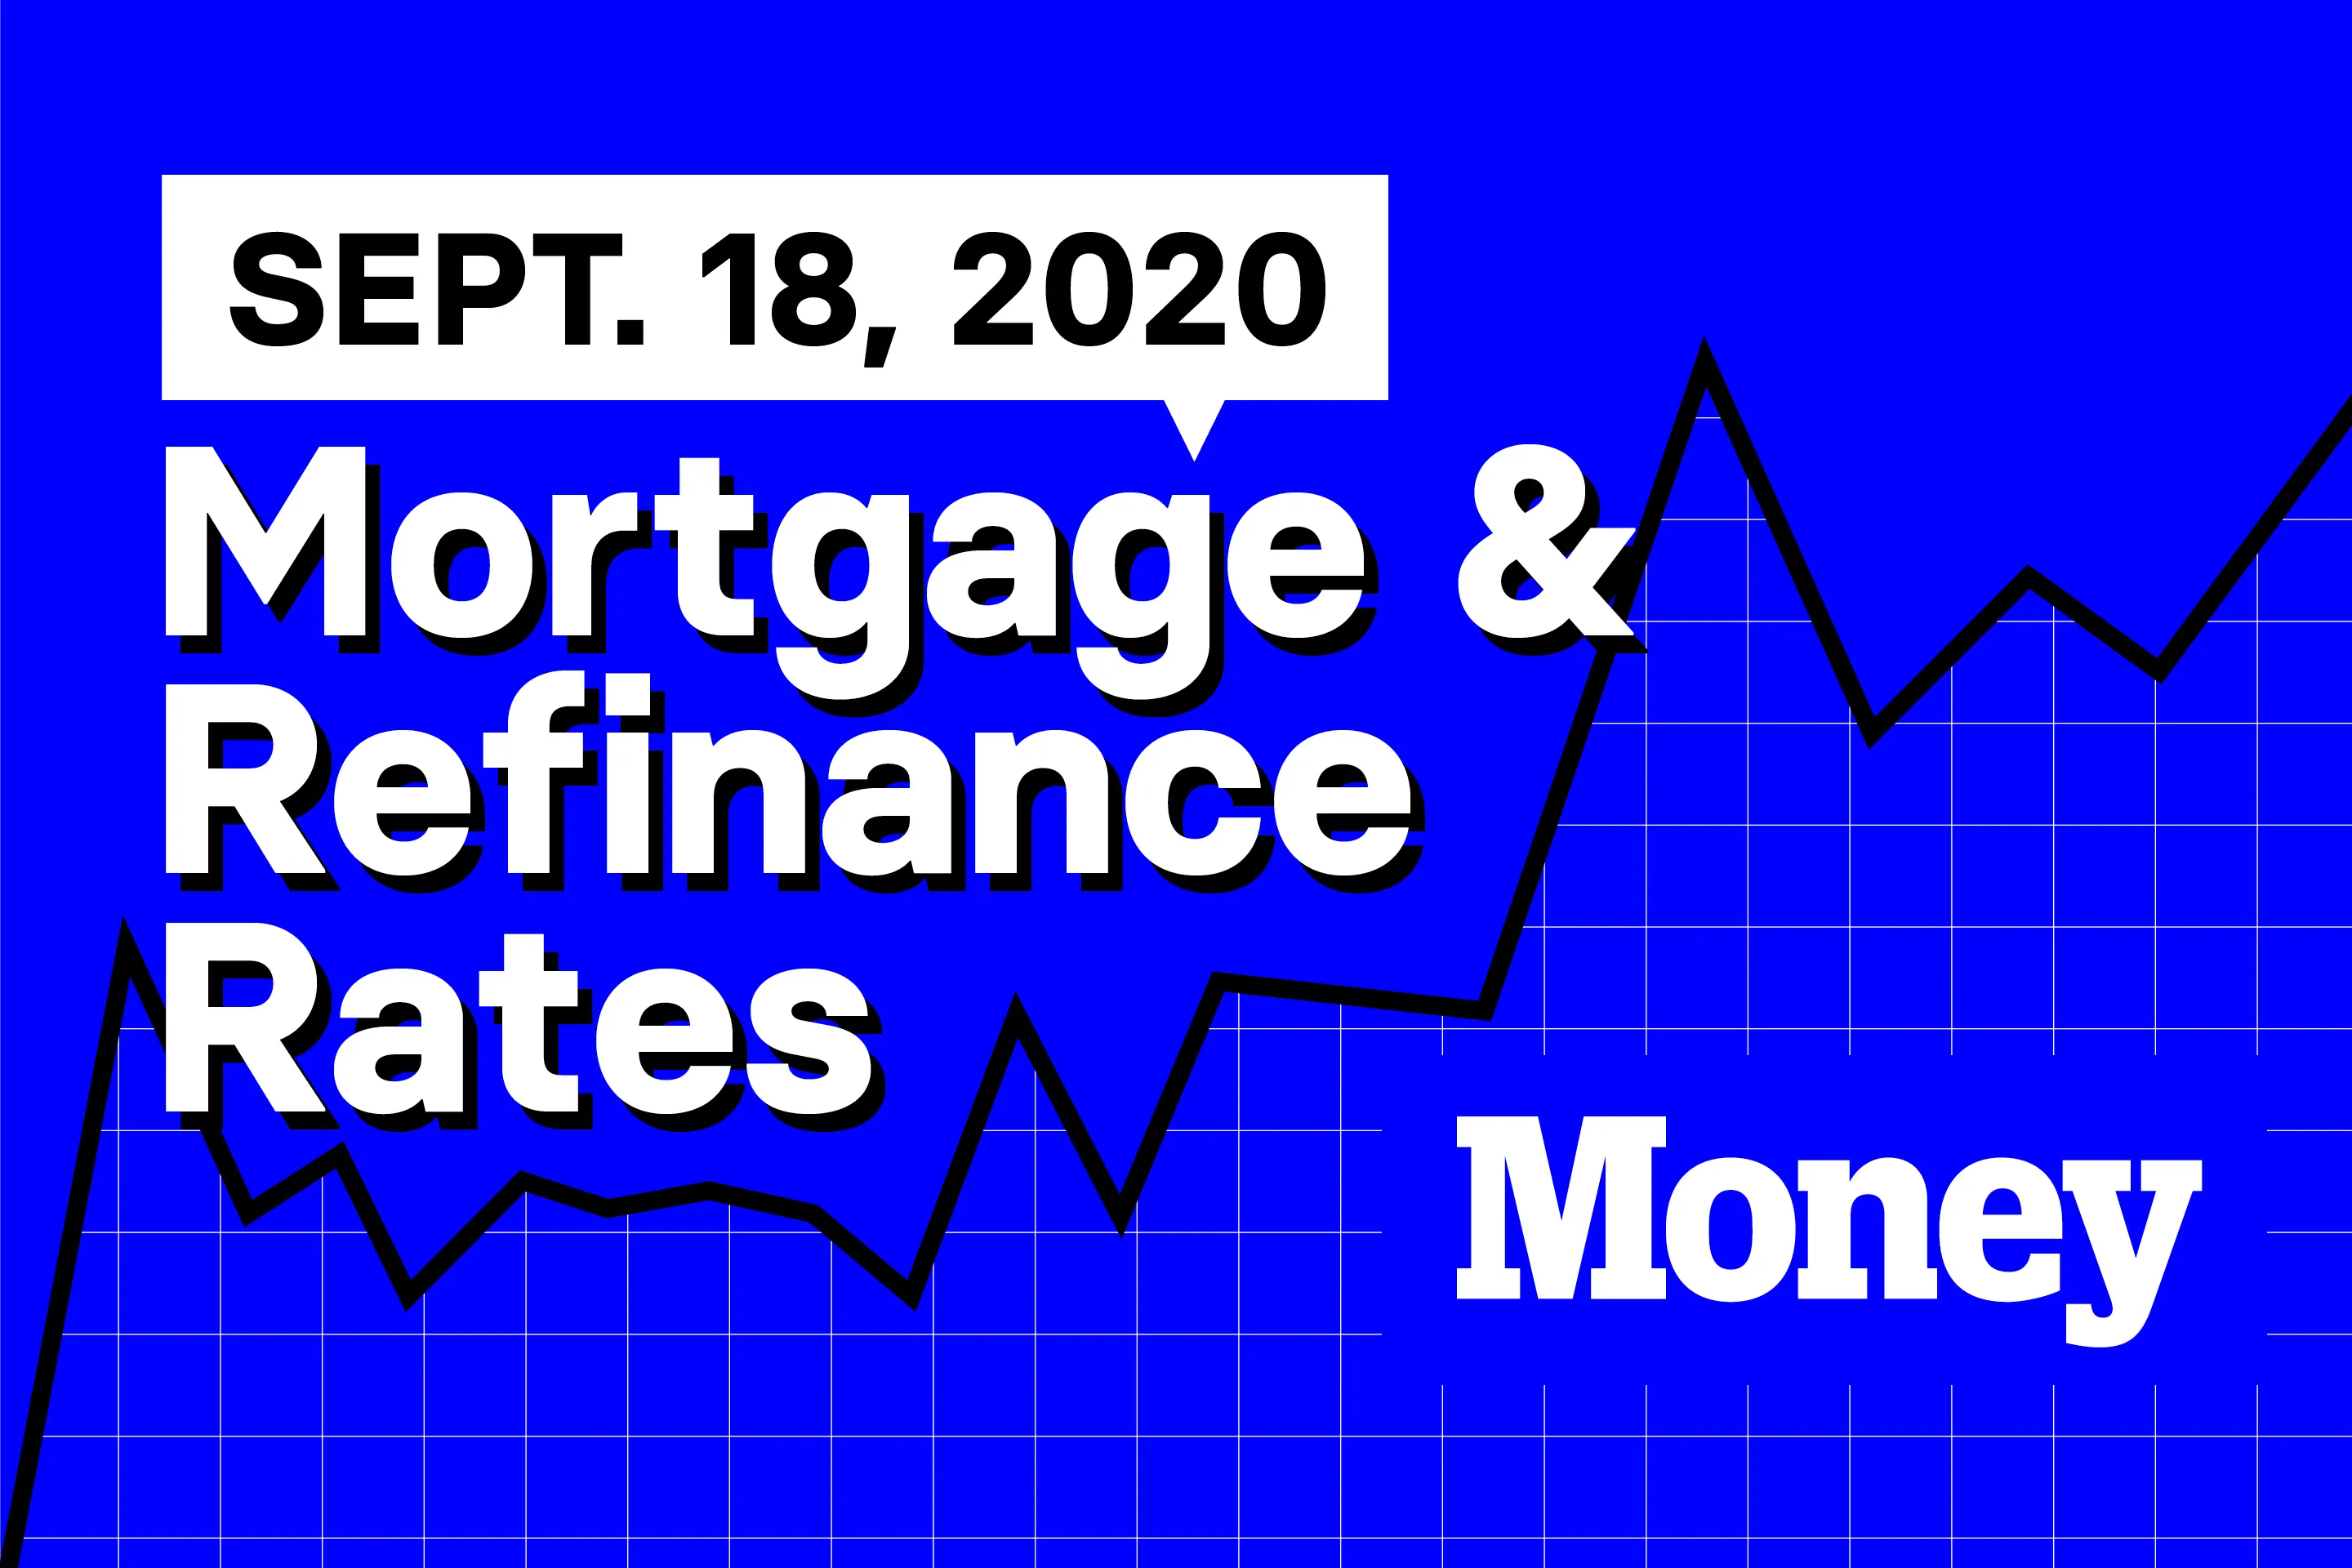 Here Are Today's Best Mortgage & Refinance Rates for September 18, 2020